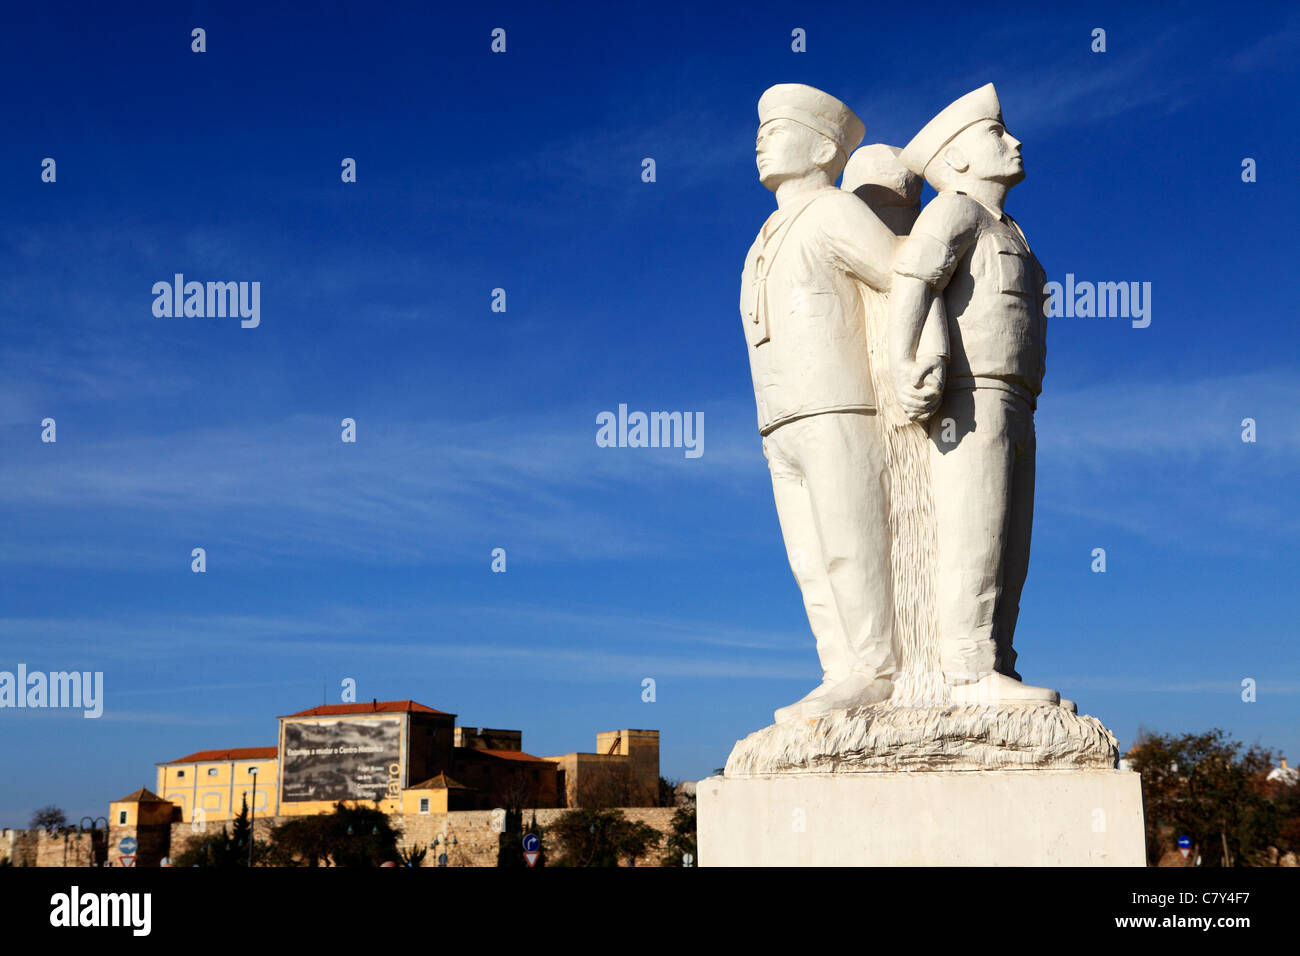 A war memorial in honour of servicemen lost during Portugal's colonial wars. Stock Photo